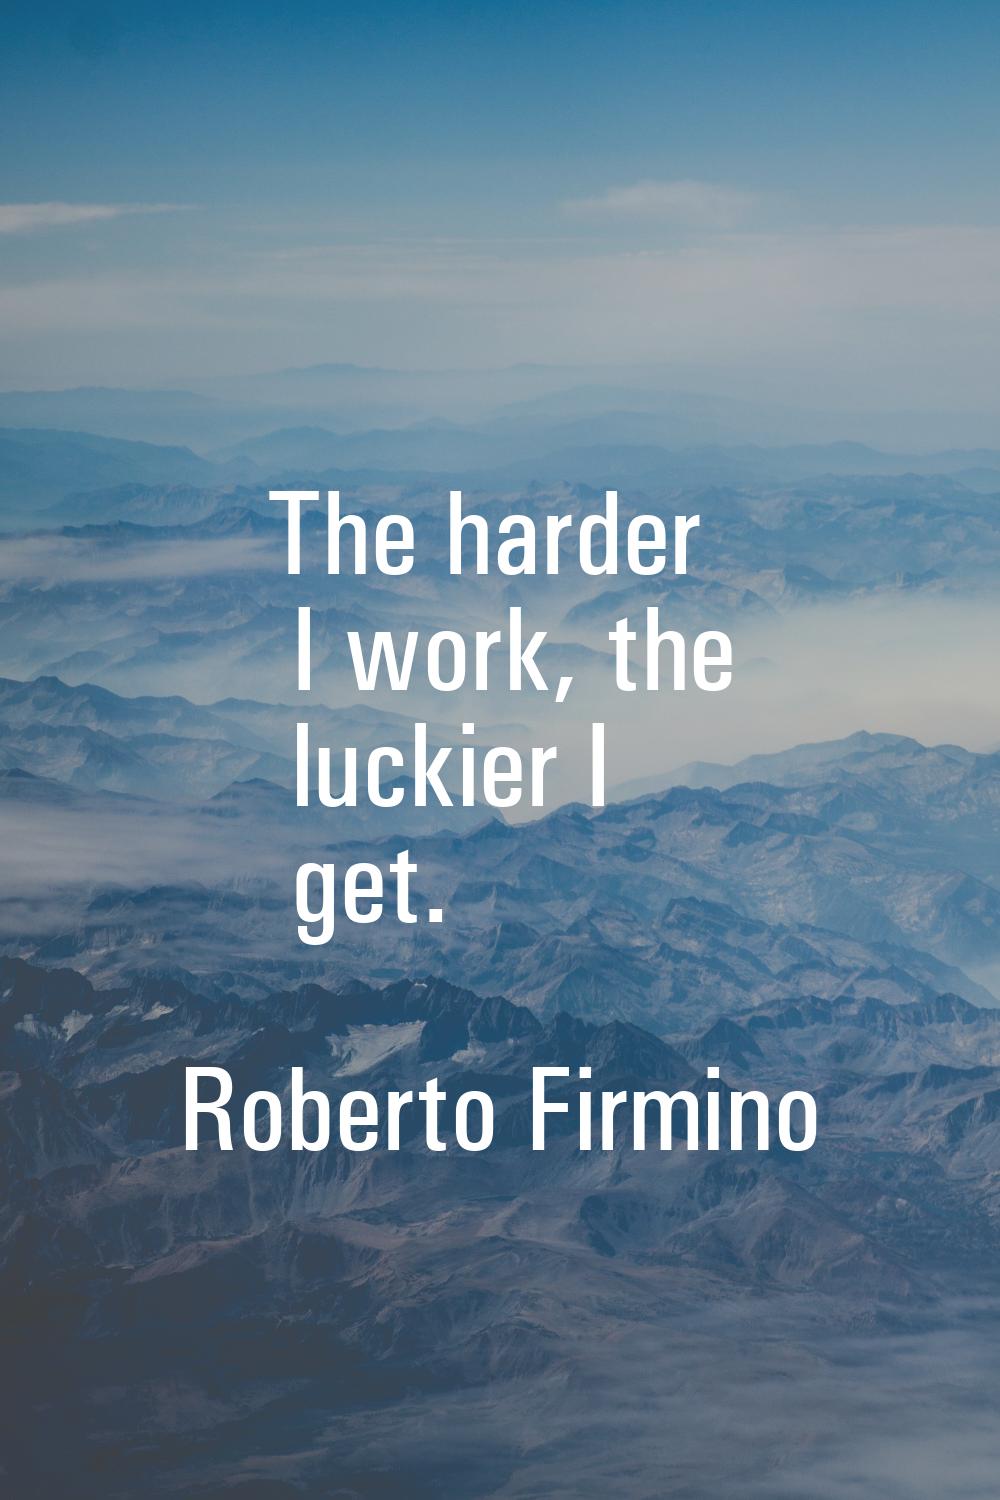 The harder I work, the luckier I get.